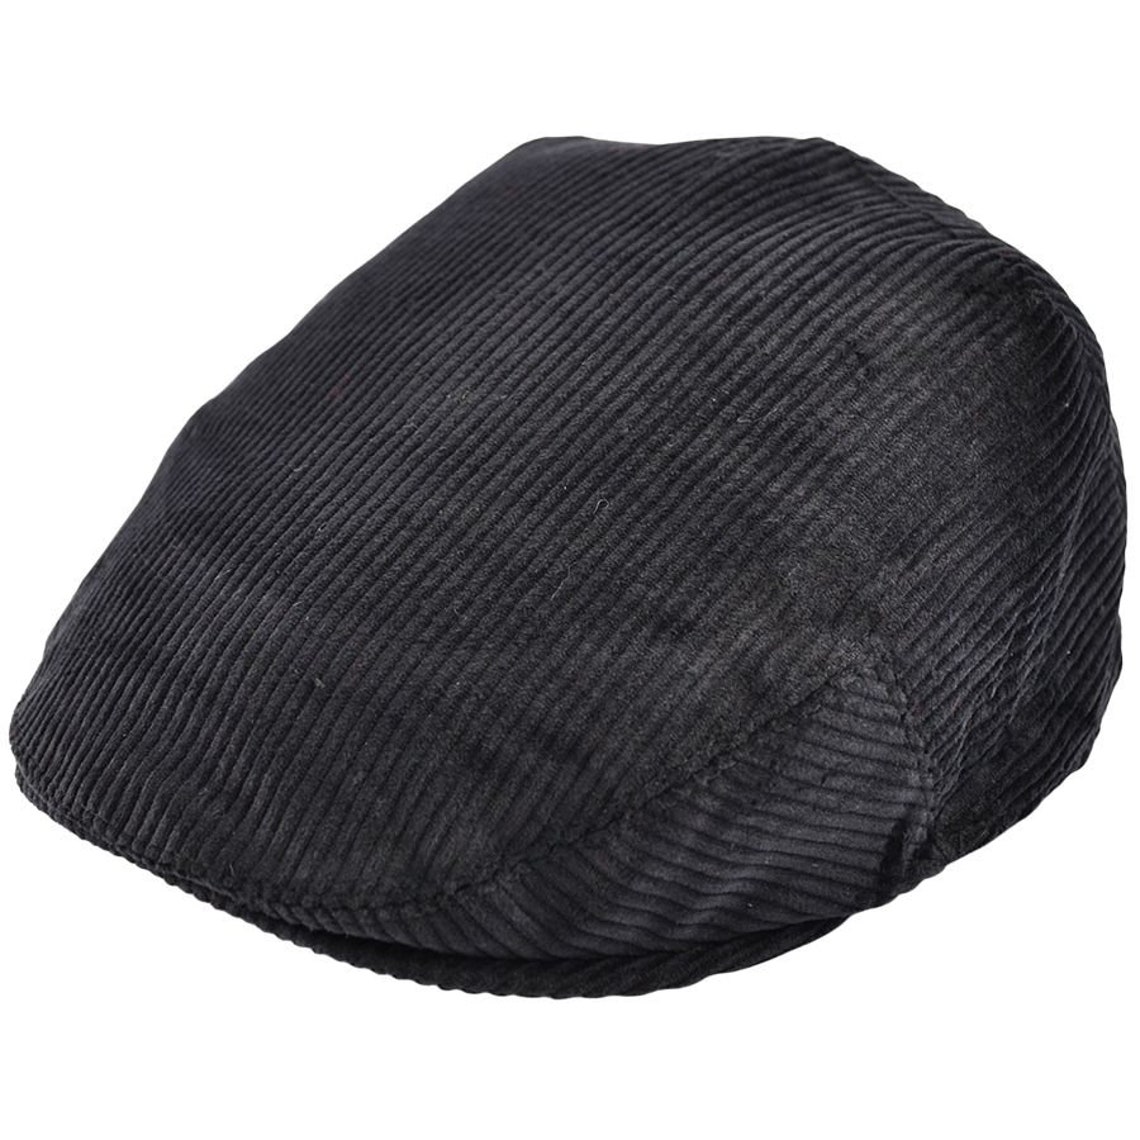 G&H Corduroy Flat Cap: Classic Style With a Touch of Texture - Etsy